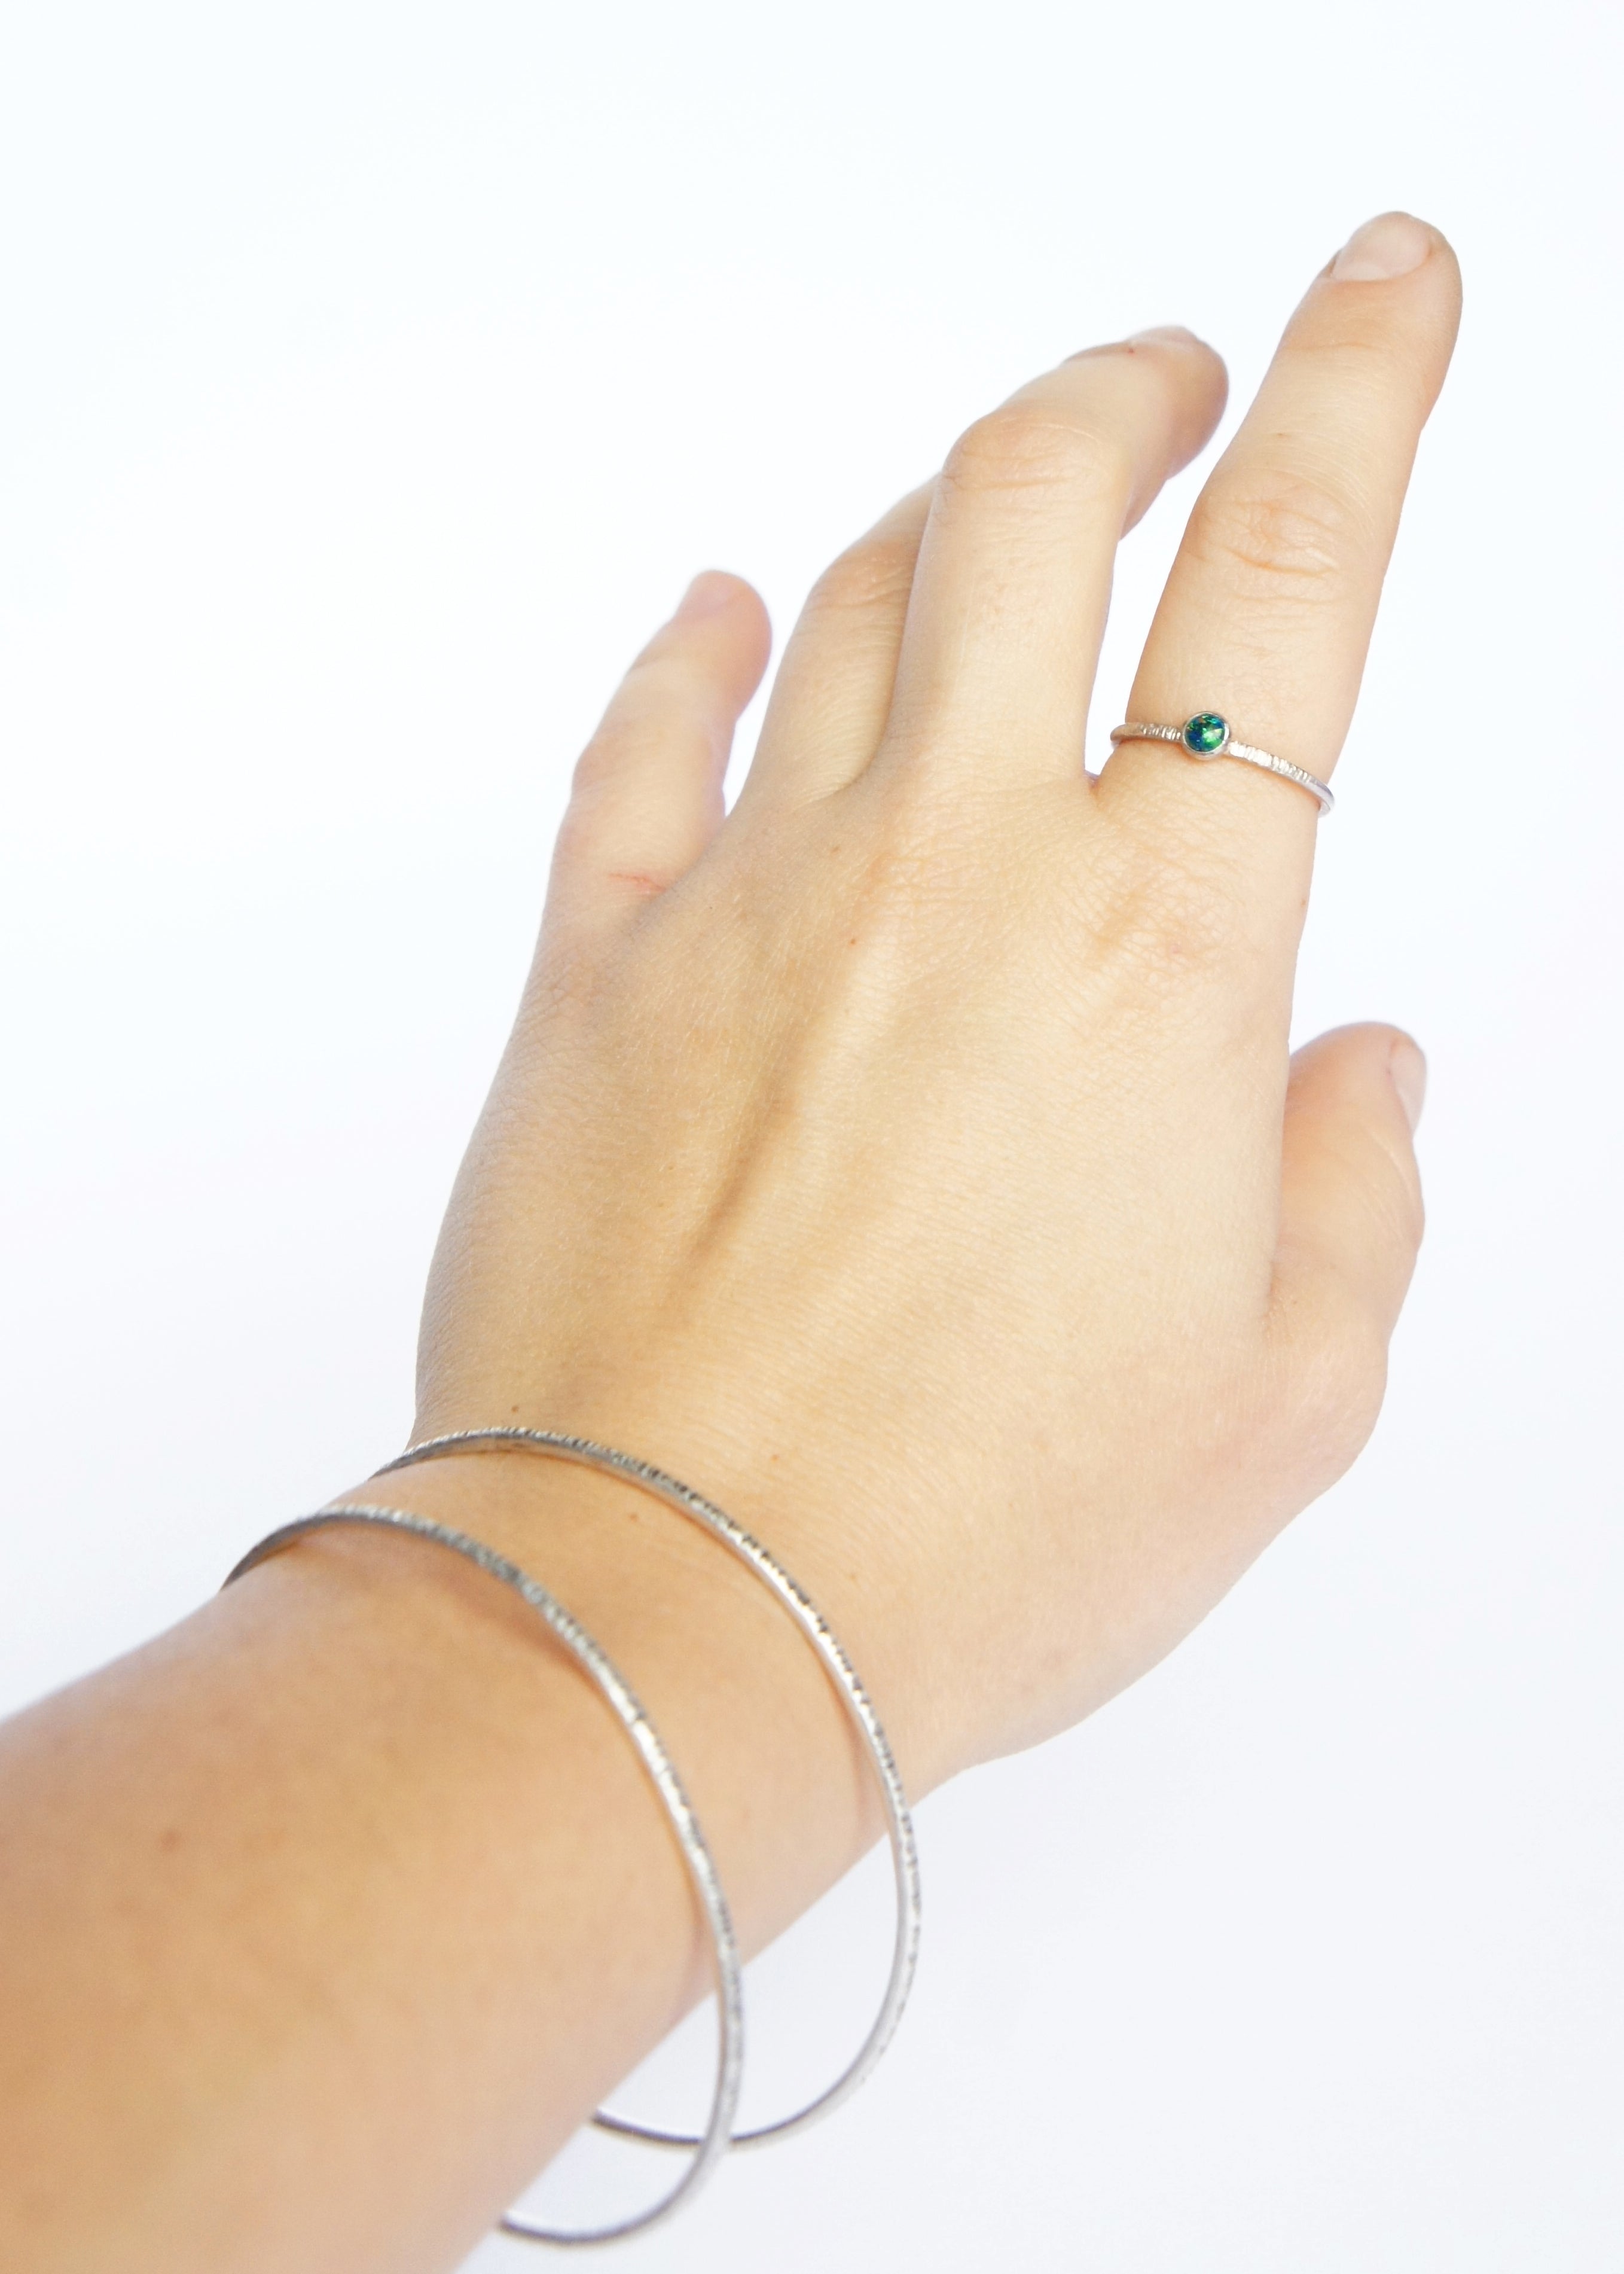 Emily Eliza Arlotte Handcrafted Fine Jewellery - Sterling Silver Opal Dainty Galaxy Ring Worn Hand on white background Bangles Textured